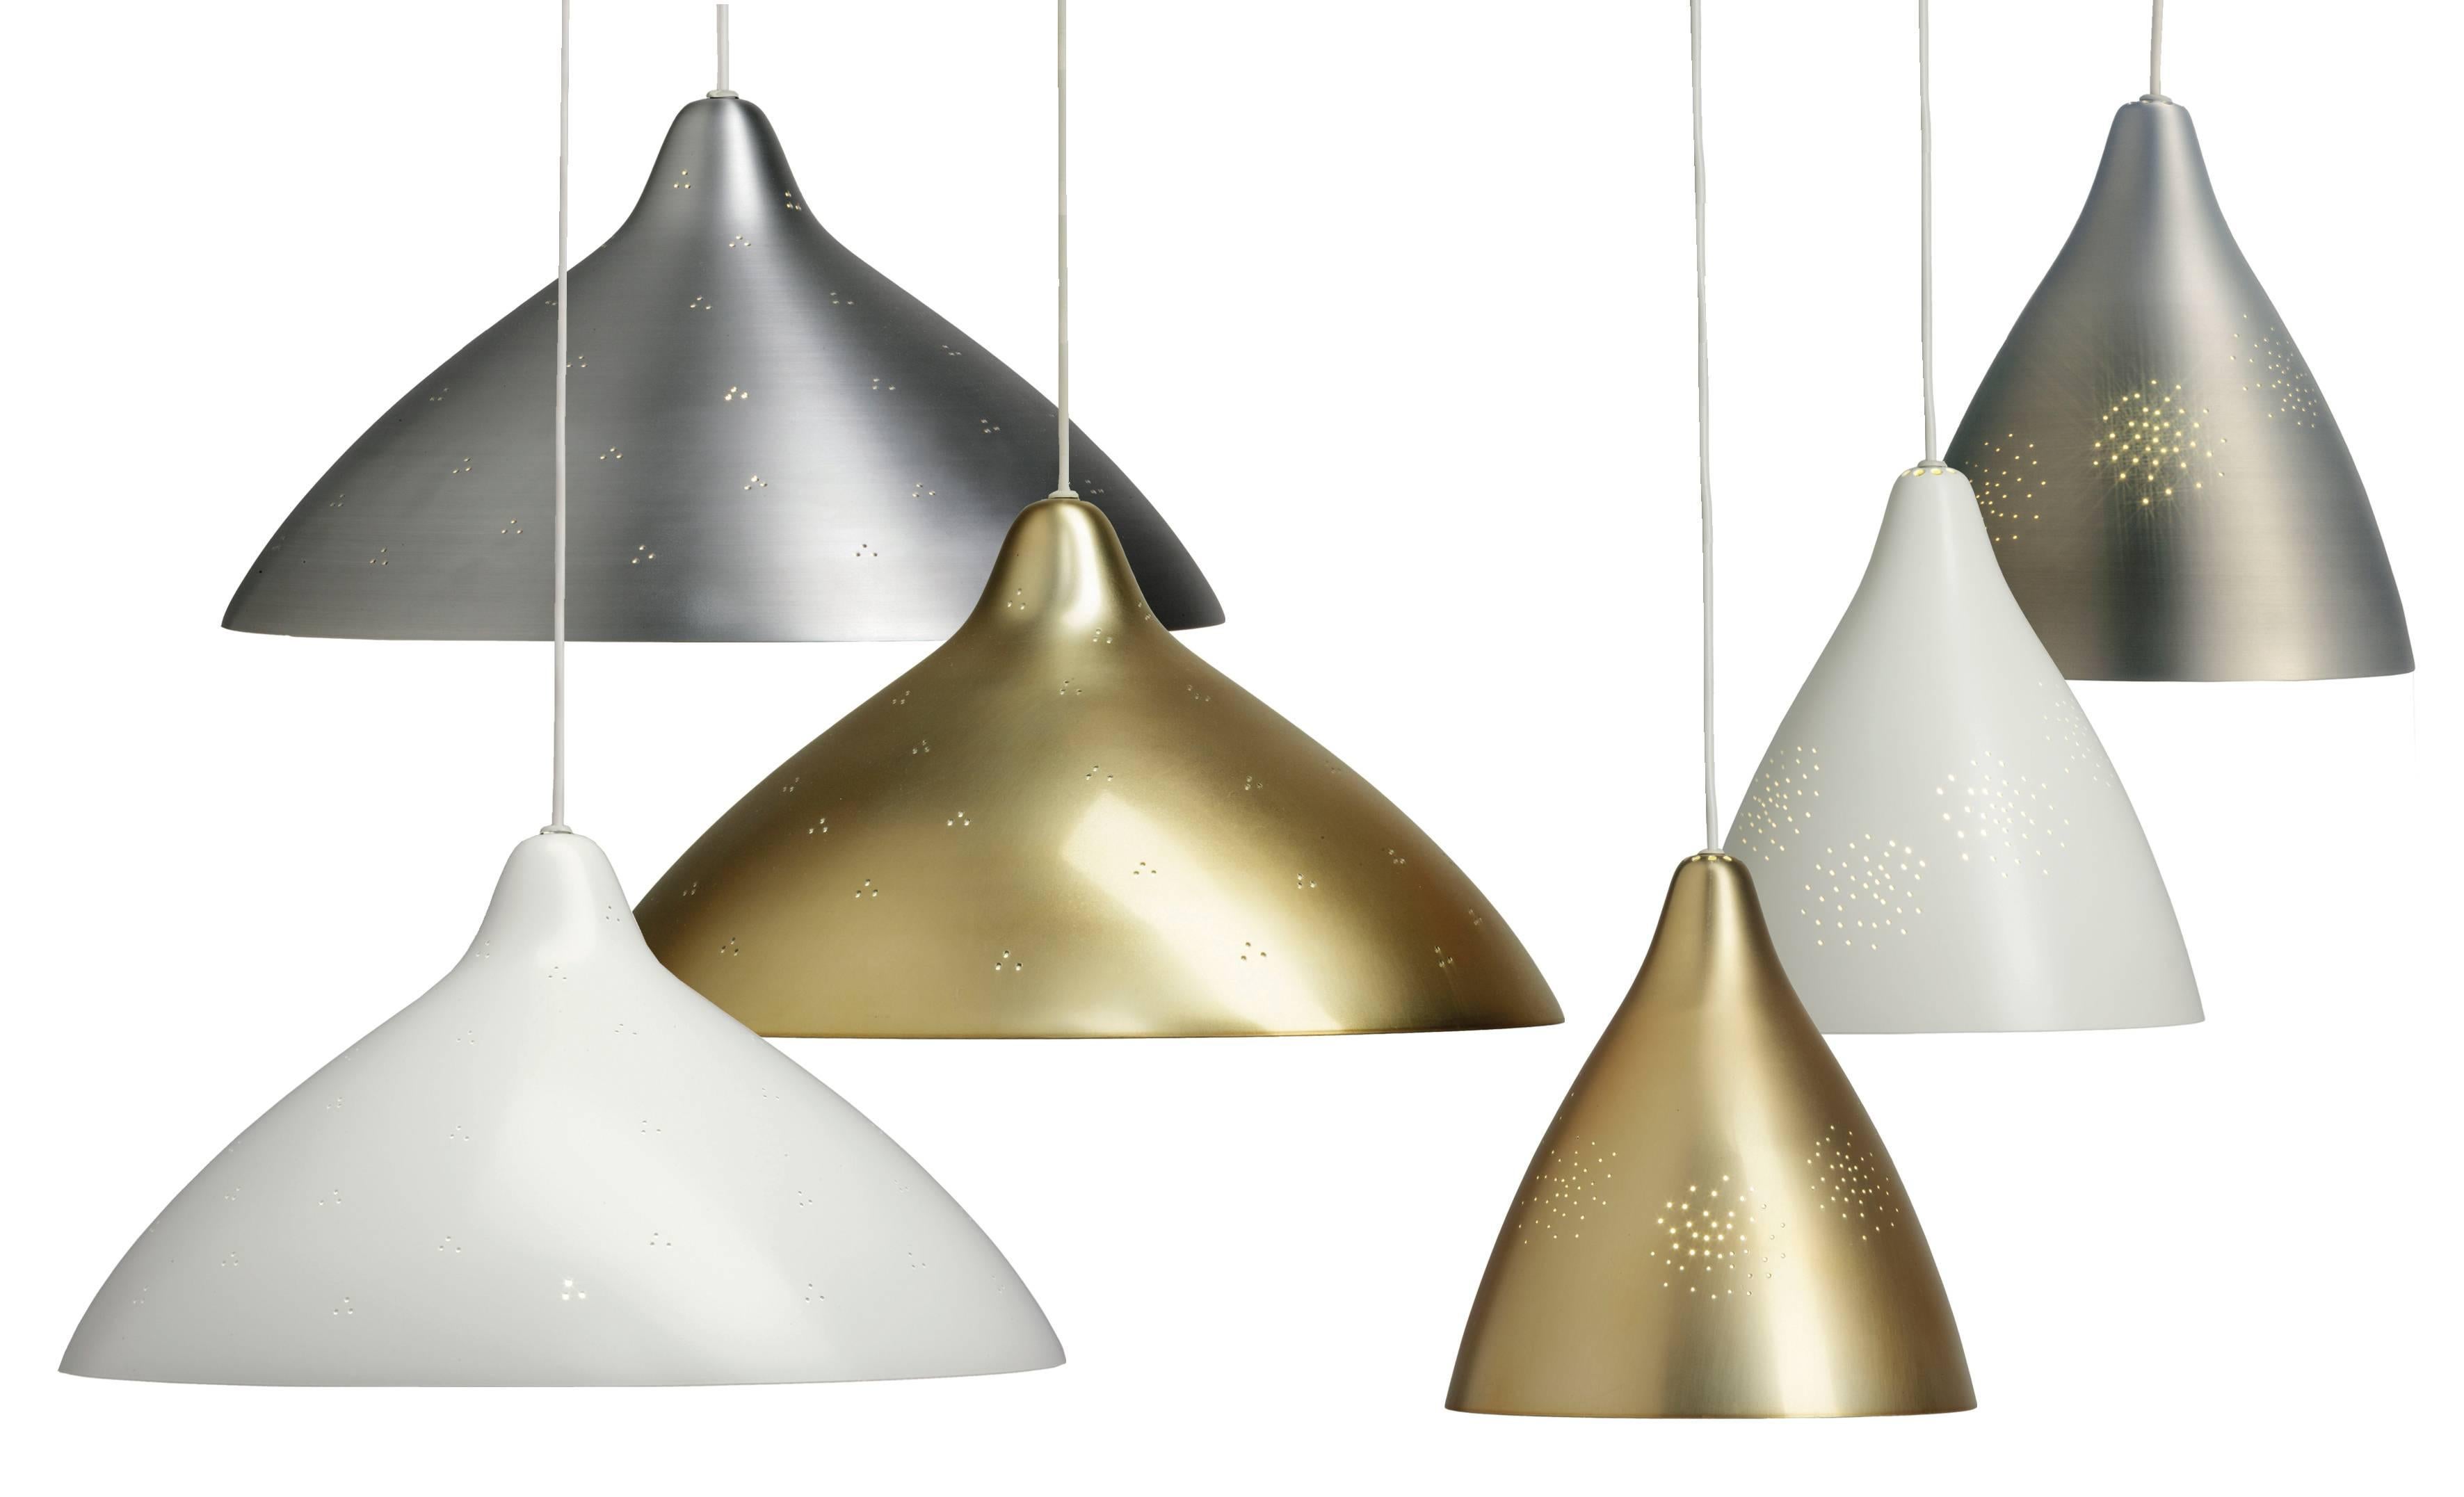 Lisa Johansson-Pape Perforated 'Hat' metal pendants. Originally designed in 1947, these authorized re-editions are true to the original charming simplicity of Pape's iconic design. The white interior of each metallic shade efficiently reflects the